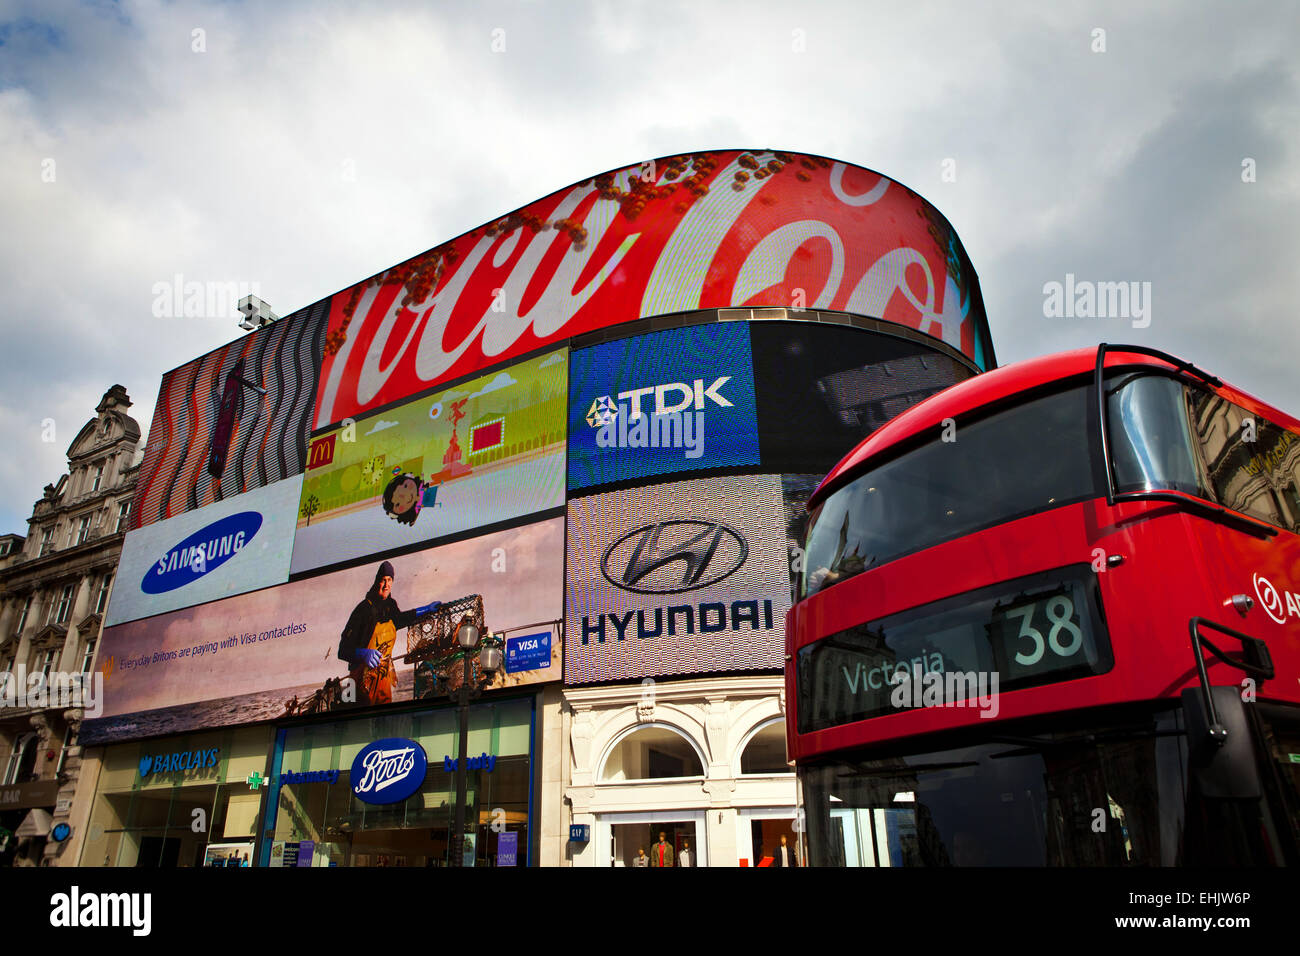 Neon advertising signs at London double decker bus, Piccadilly Circus, London Stock Photo